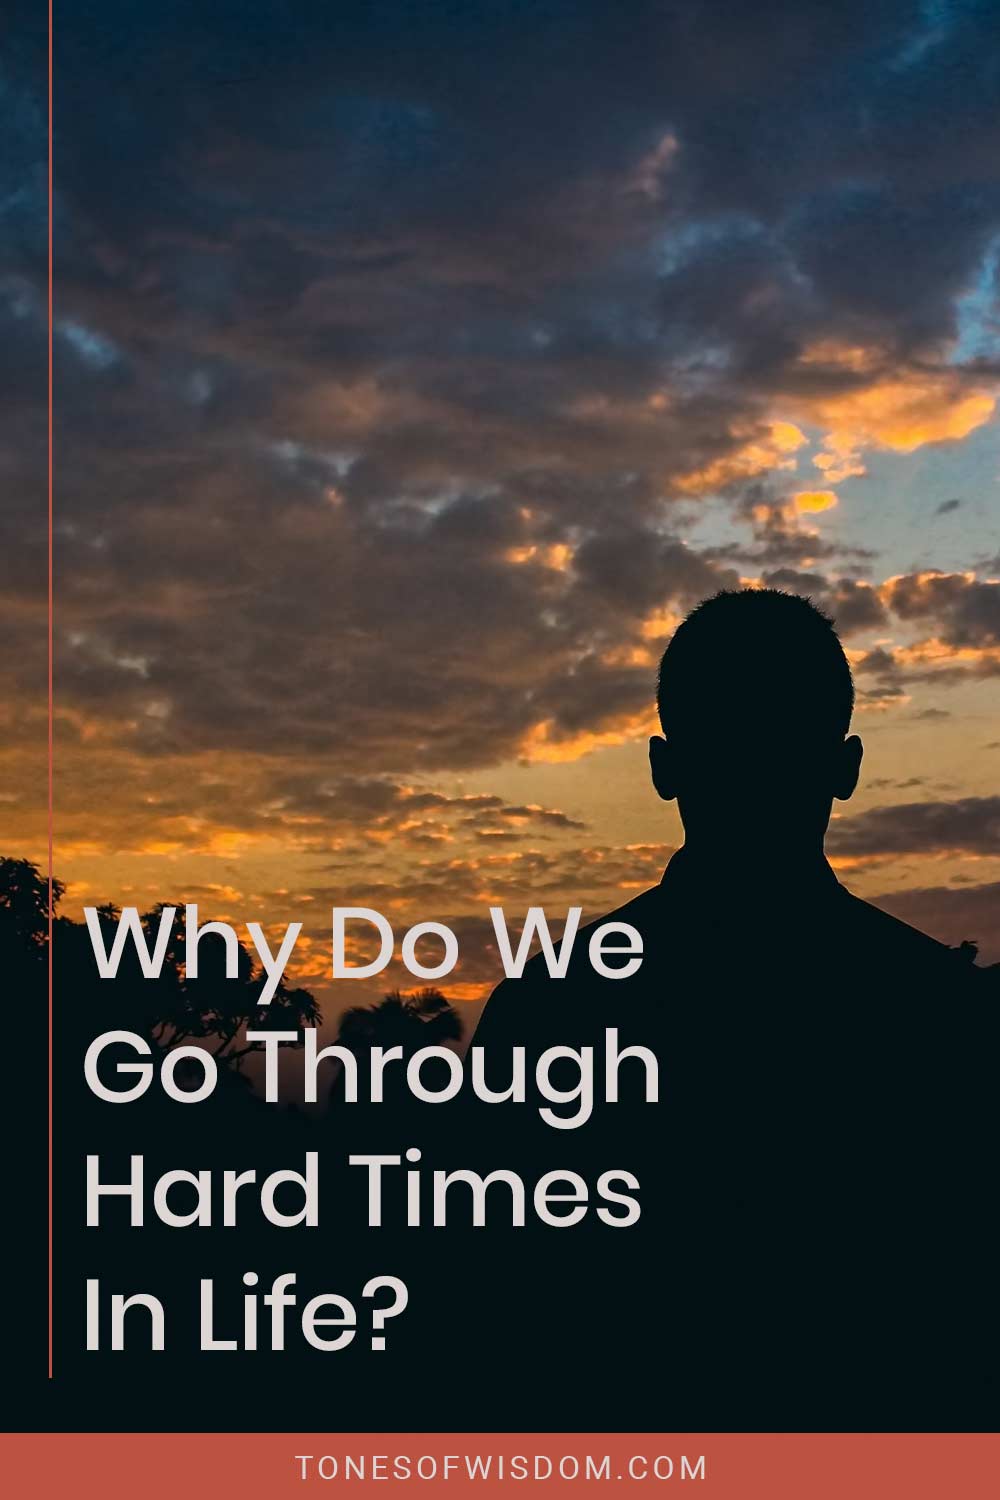 Why Do We Go Through Hard Times In Life?